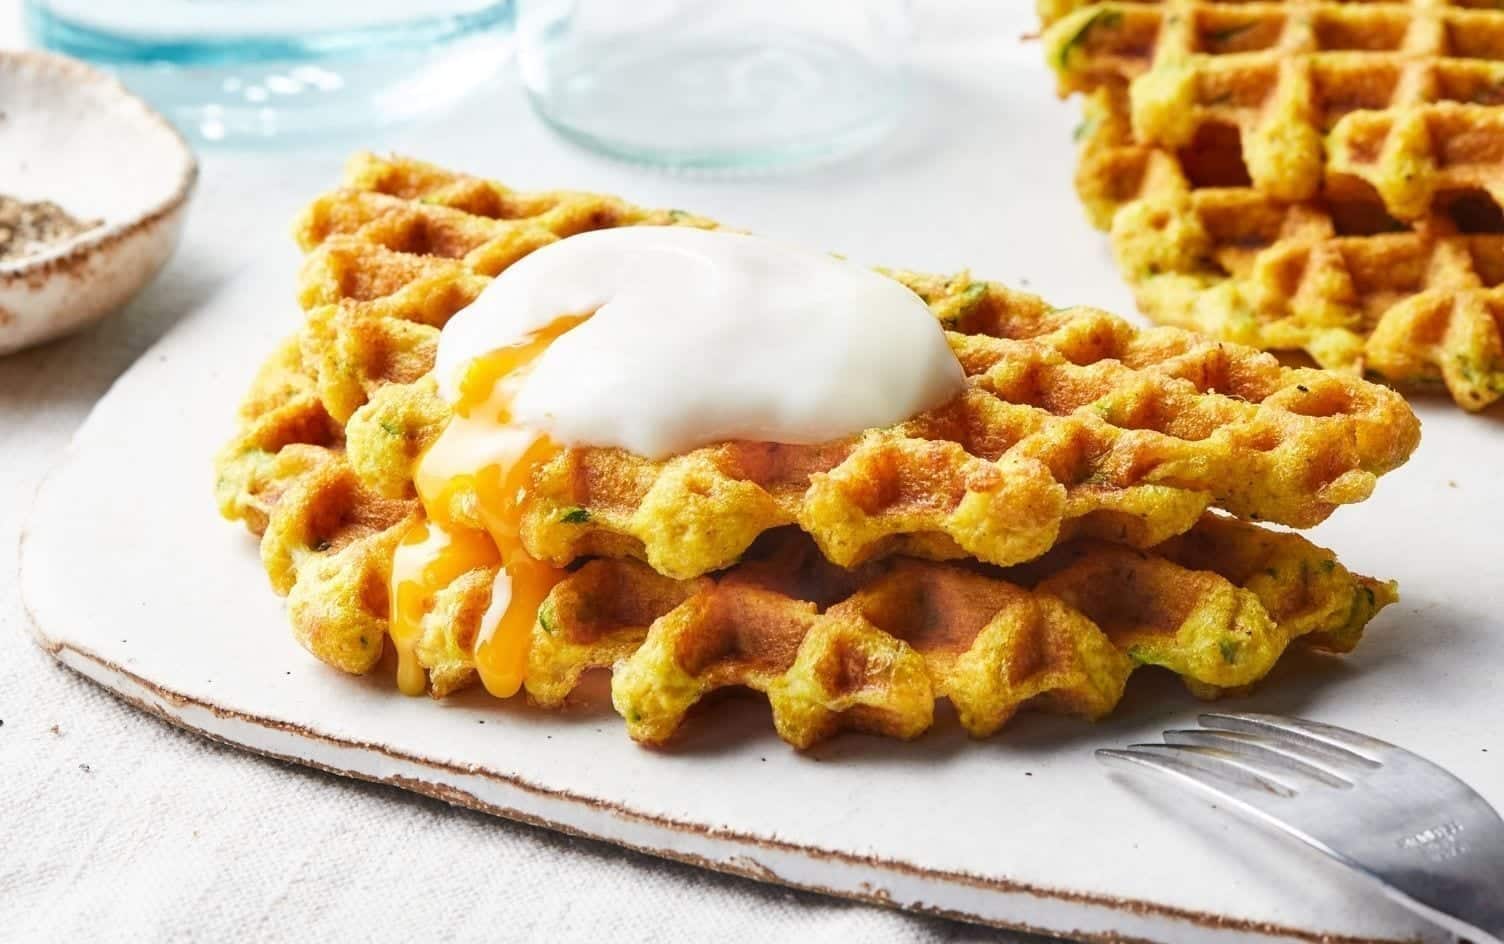 Savory Low-Carb Zucchini Waffles With Poached Eggs